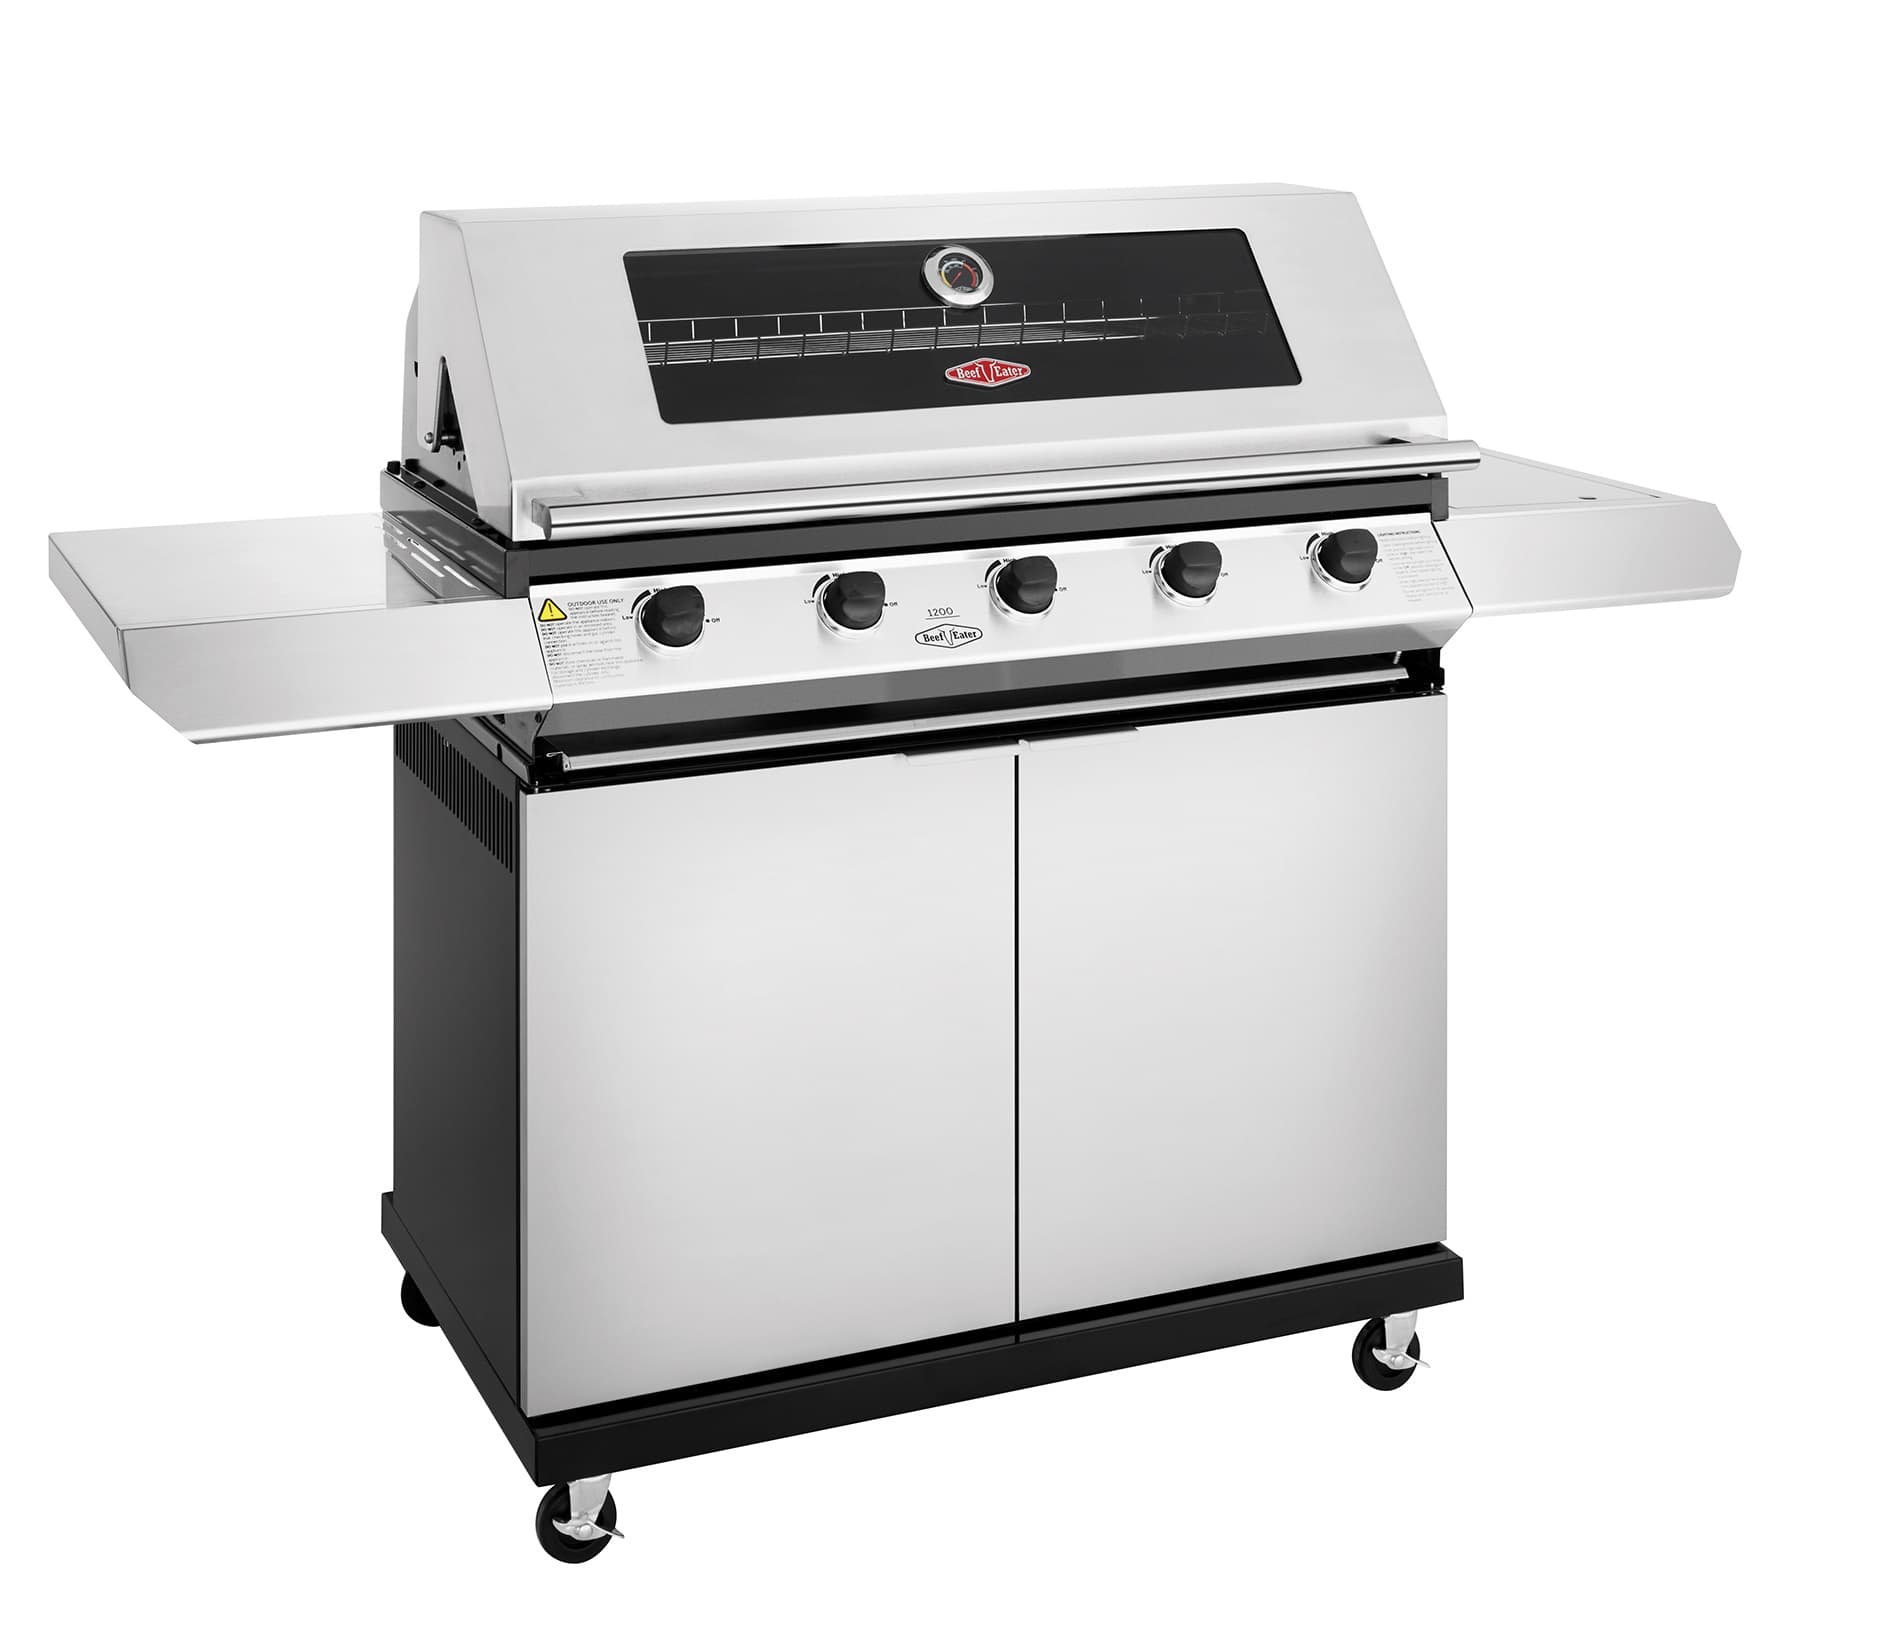 Beefeater 1200S Series - 5 Burner Freestanding Gas Barbecue